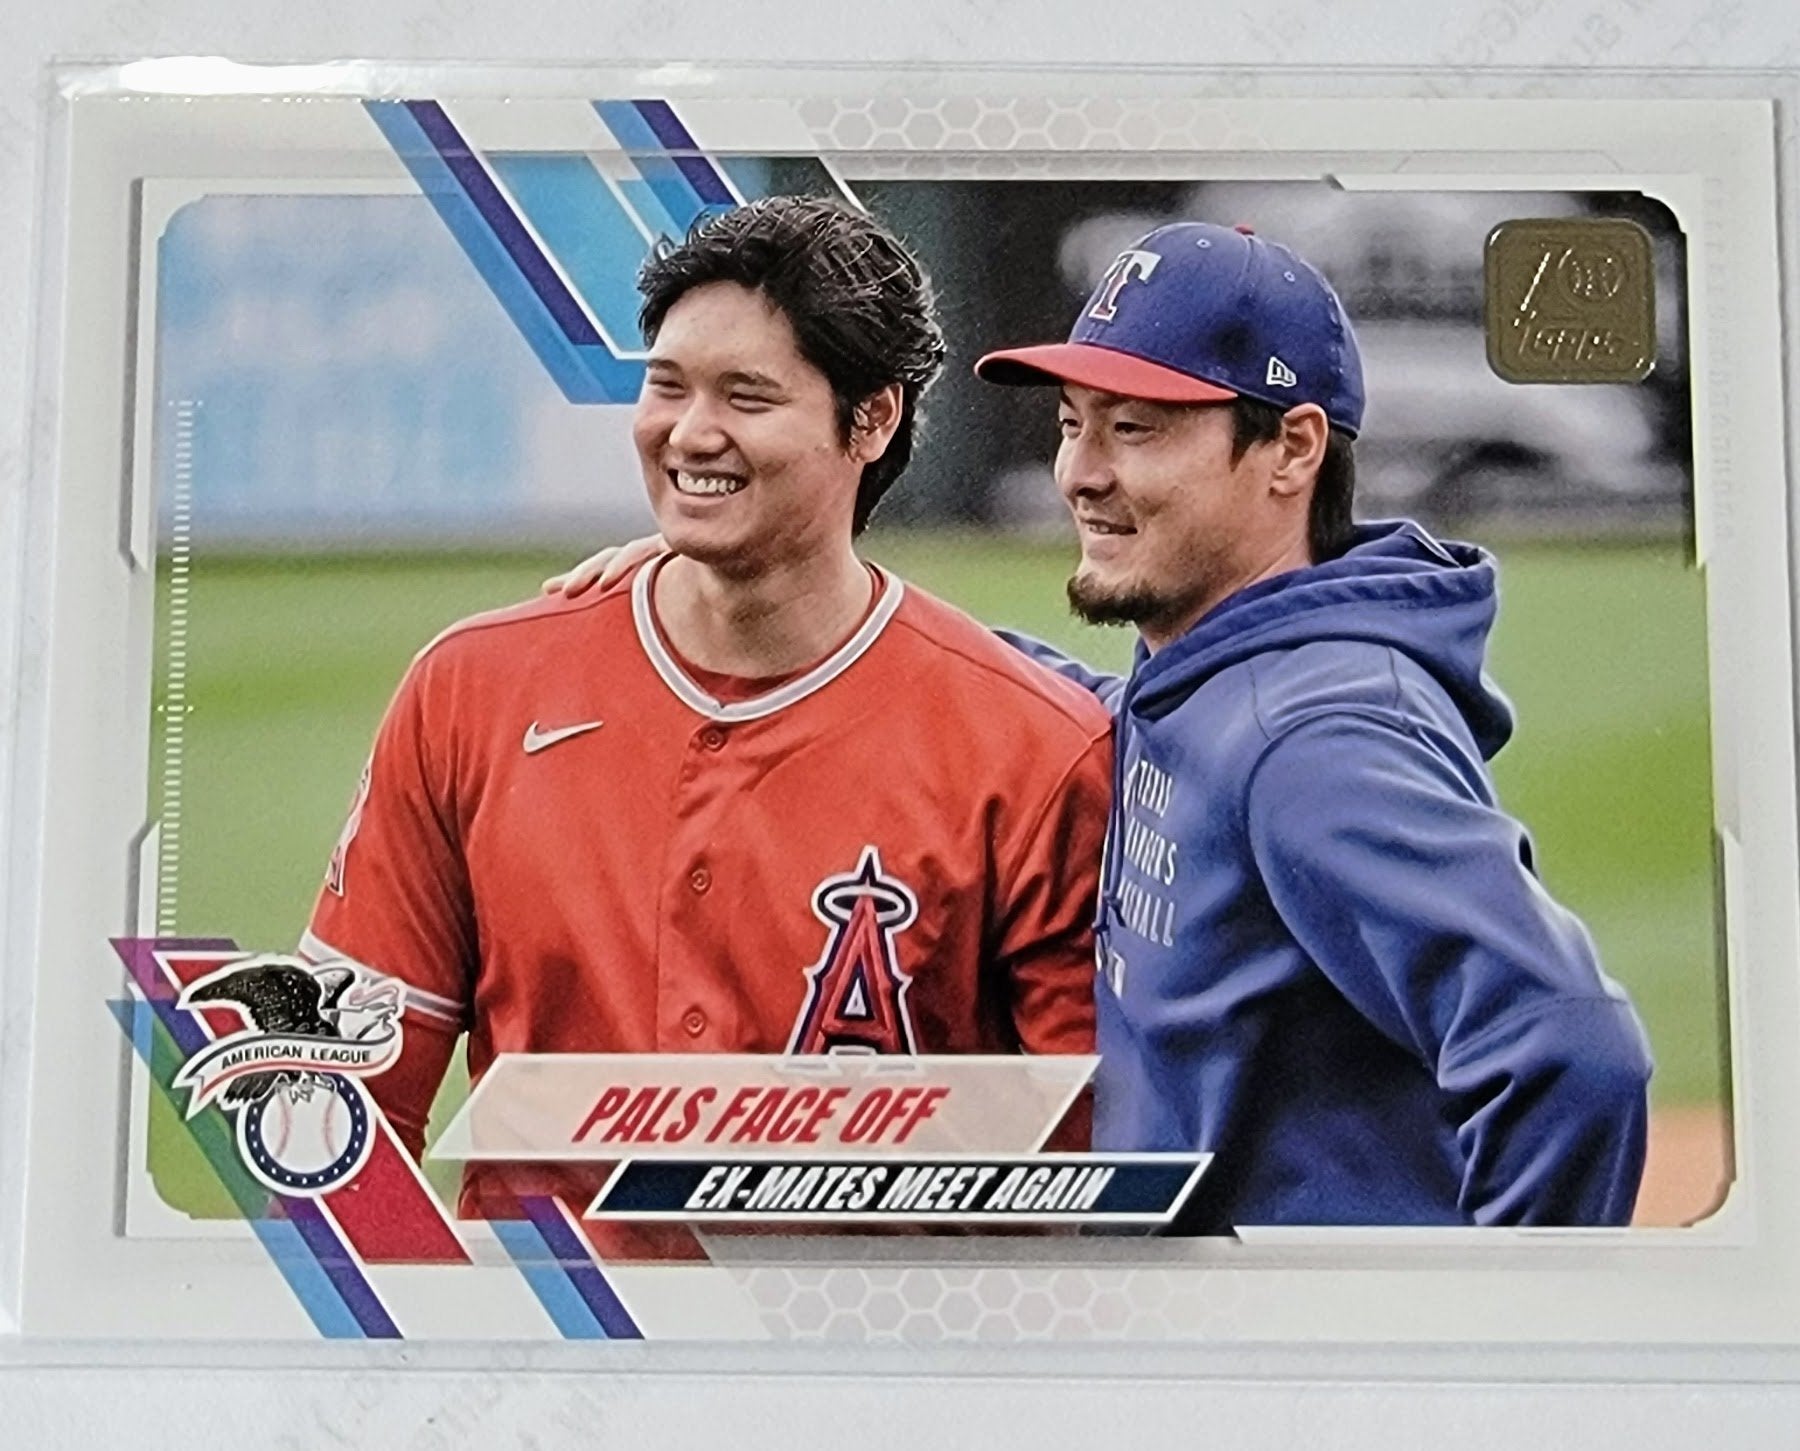 2021 Topps Update Pals Face Off Ohtani Baseball Trading Card SMCB1 simple Xclusive Collectibles   